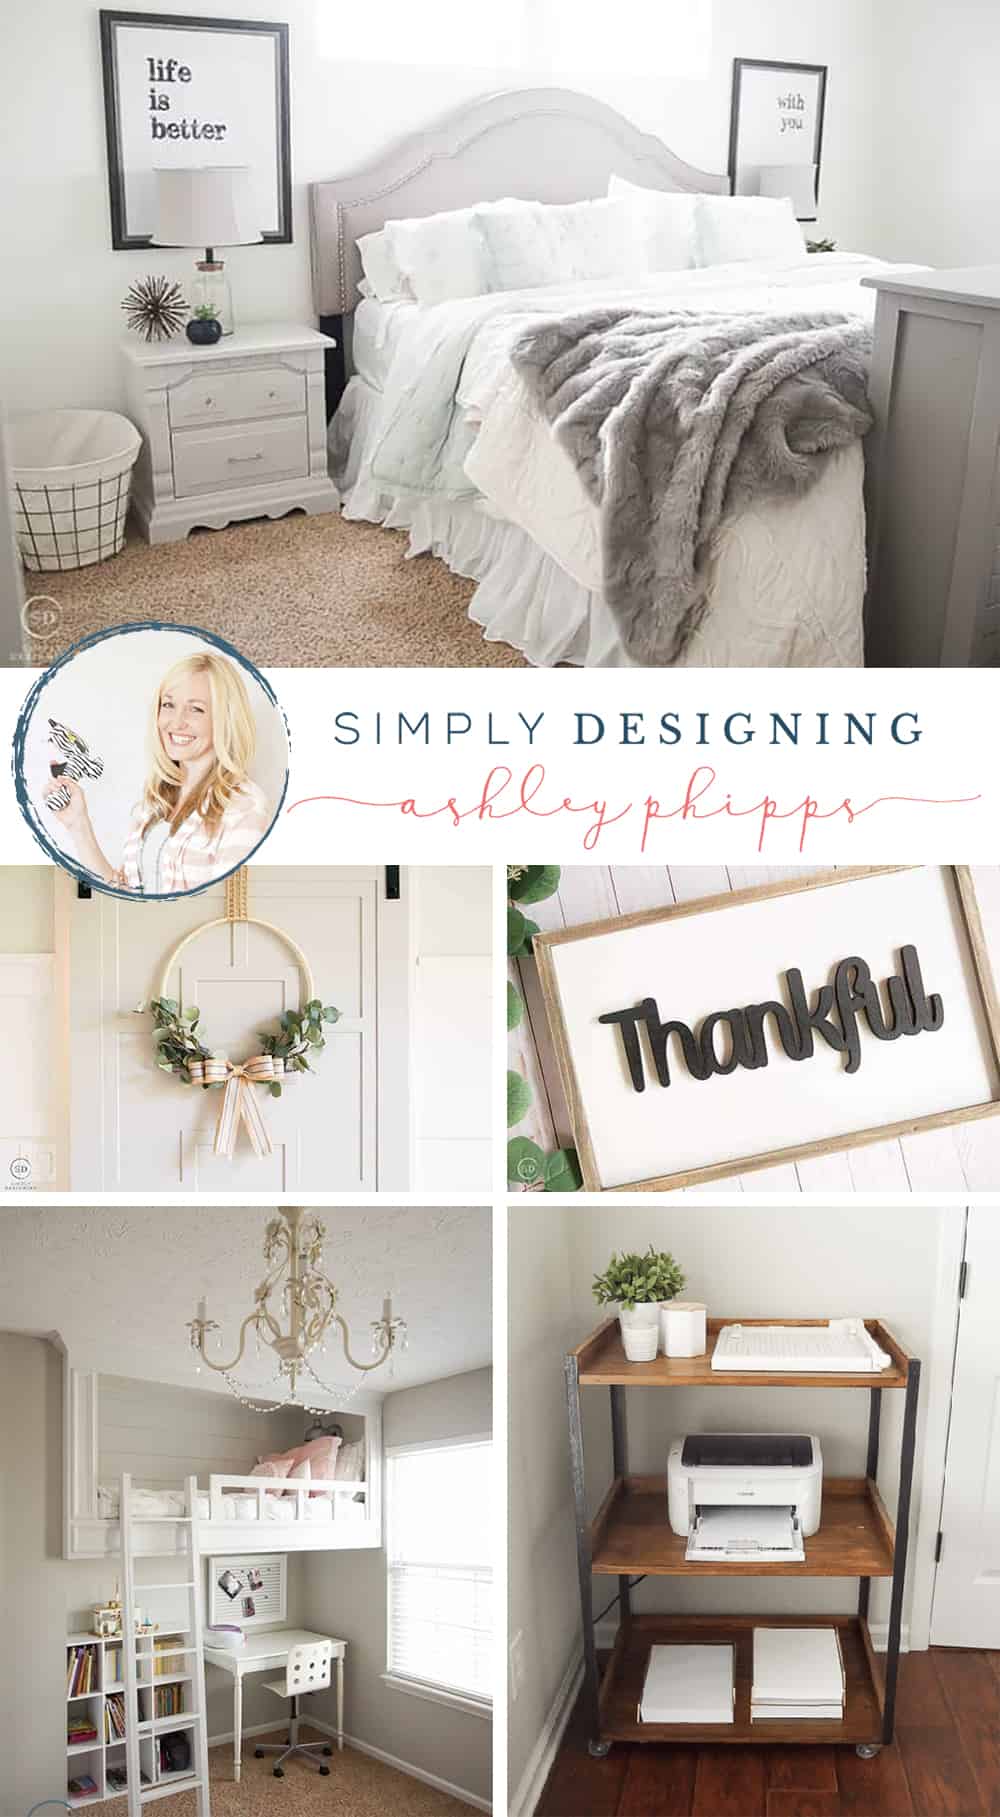 SimplyDesigning AshleyPhipps 45 Light Bright and Beautiful Home Inspiration Ideas 29 back to school